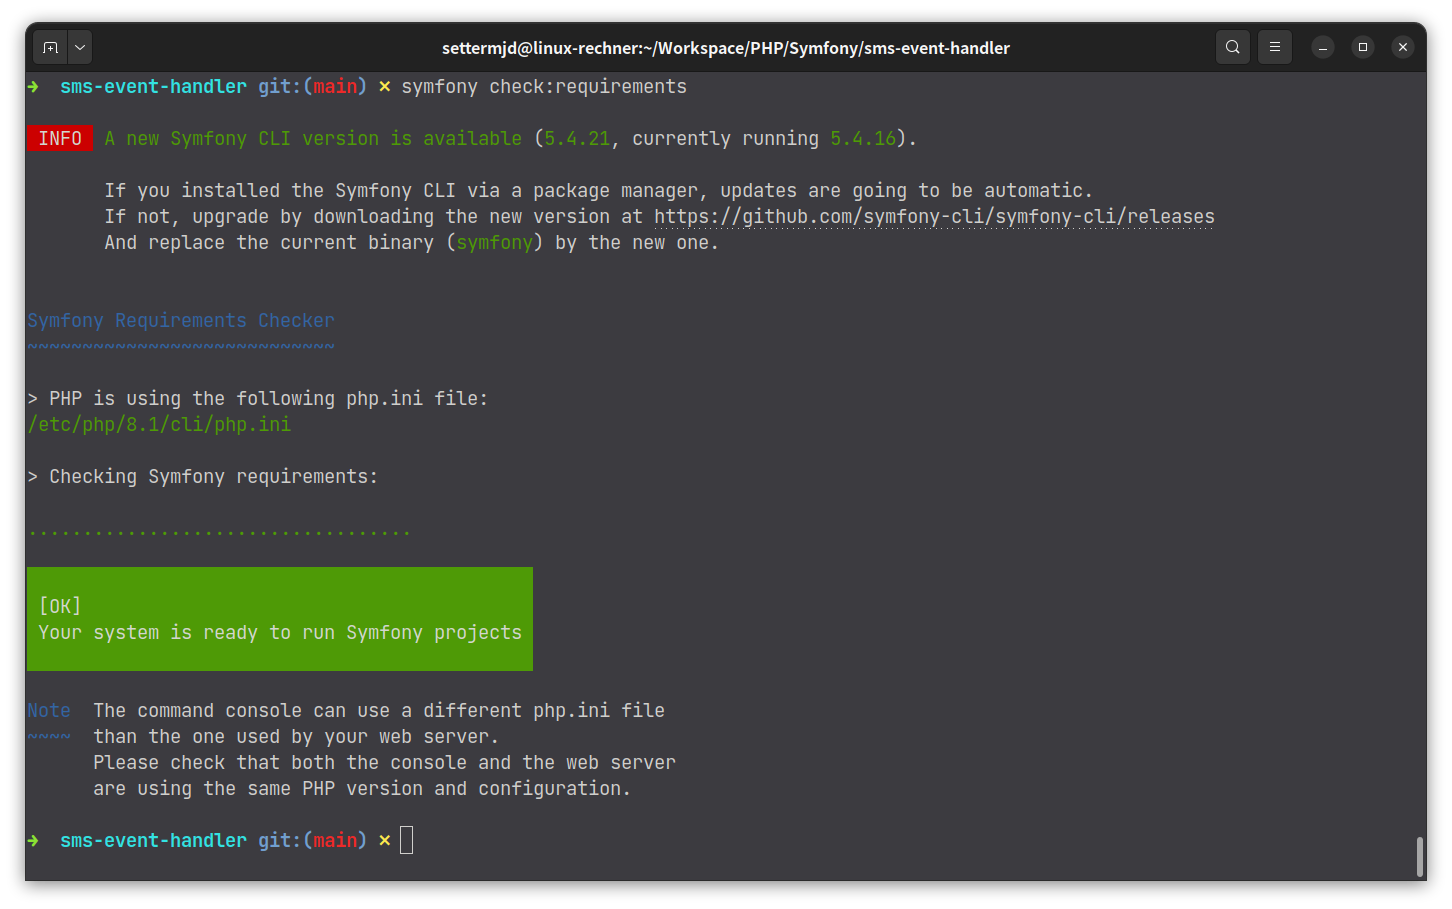 The symfony check:requirements output printed to the terminal